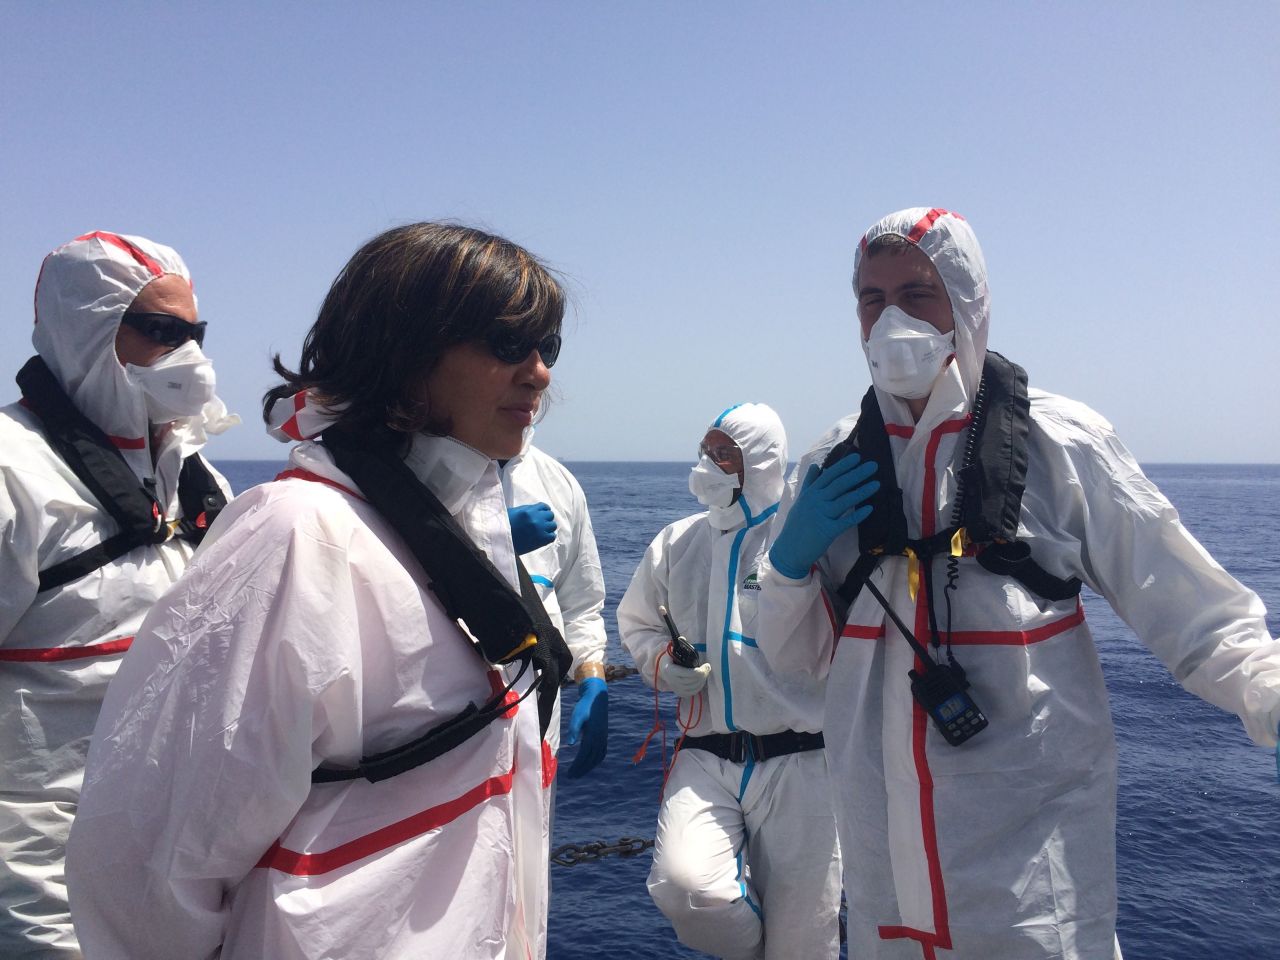 Everyone who participated rescue had to suit up in full protective gear in case any of the refugees and migrants were carrying diseases -- that rule was no different for Amanpour.